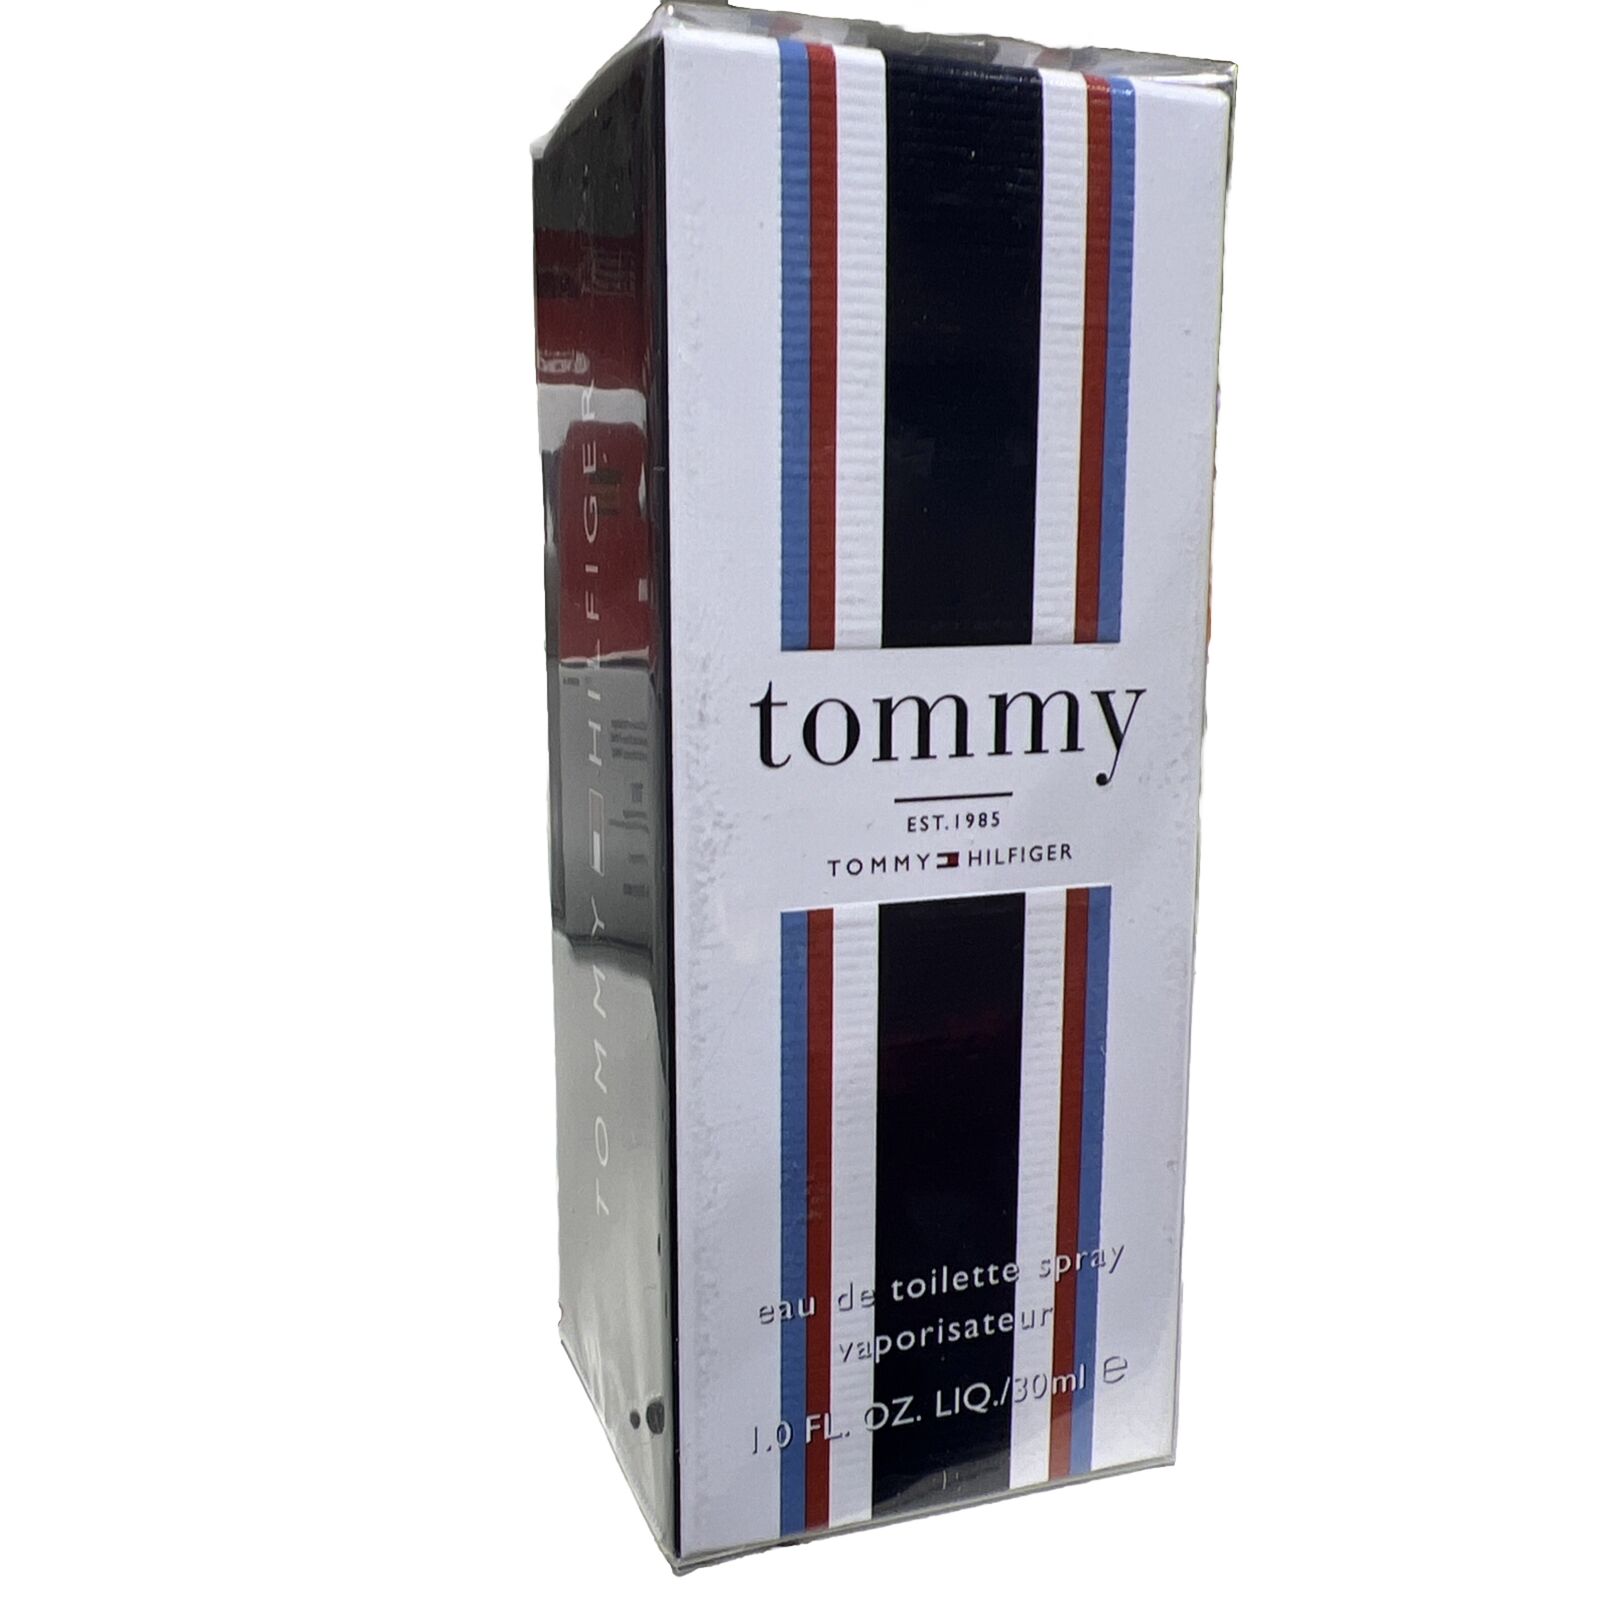 Tommy by Tommy Hilfiger 1 oz EDT Cologne for Men New In Box